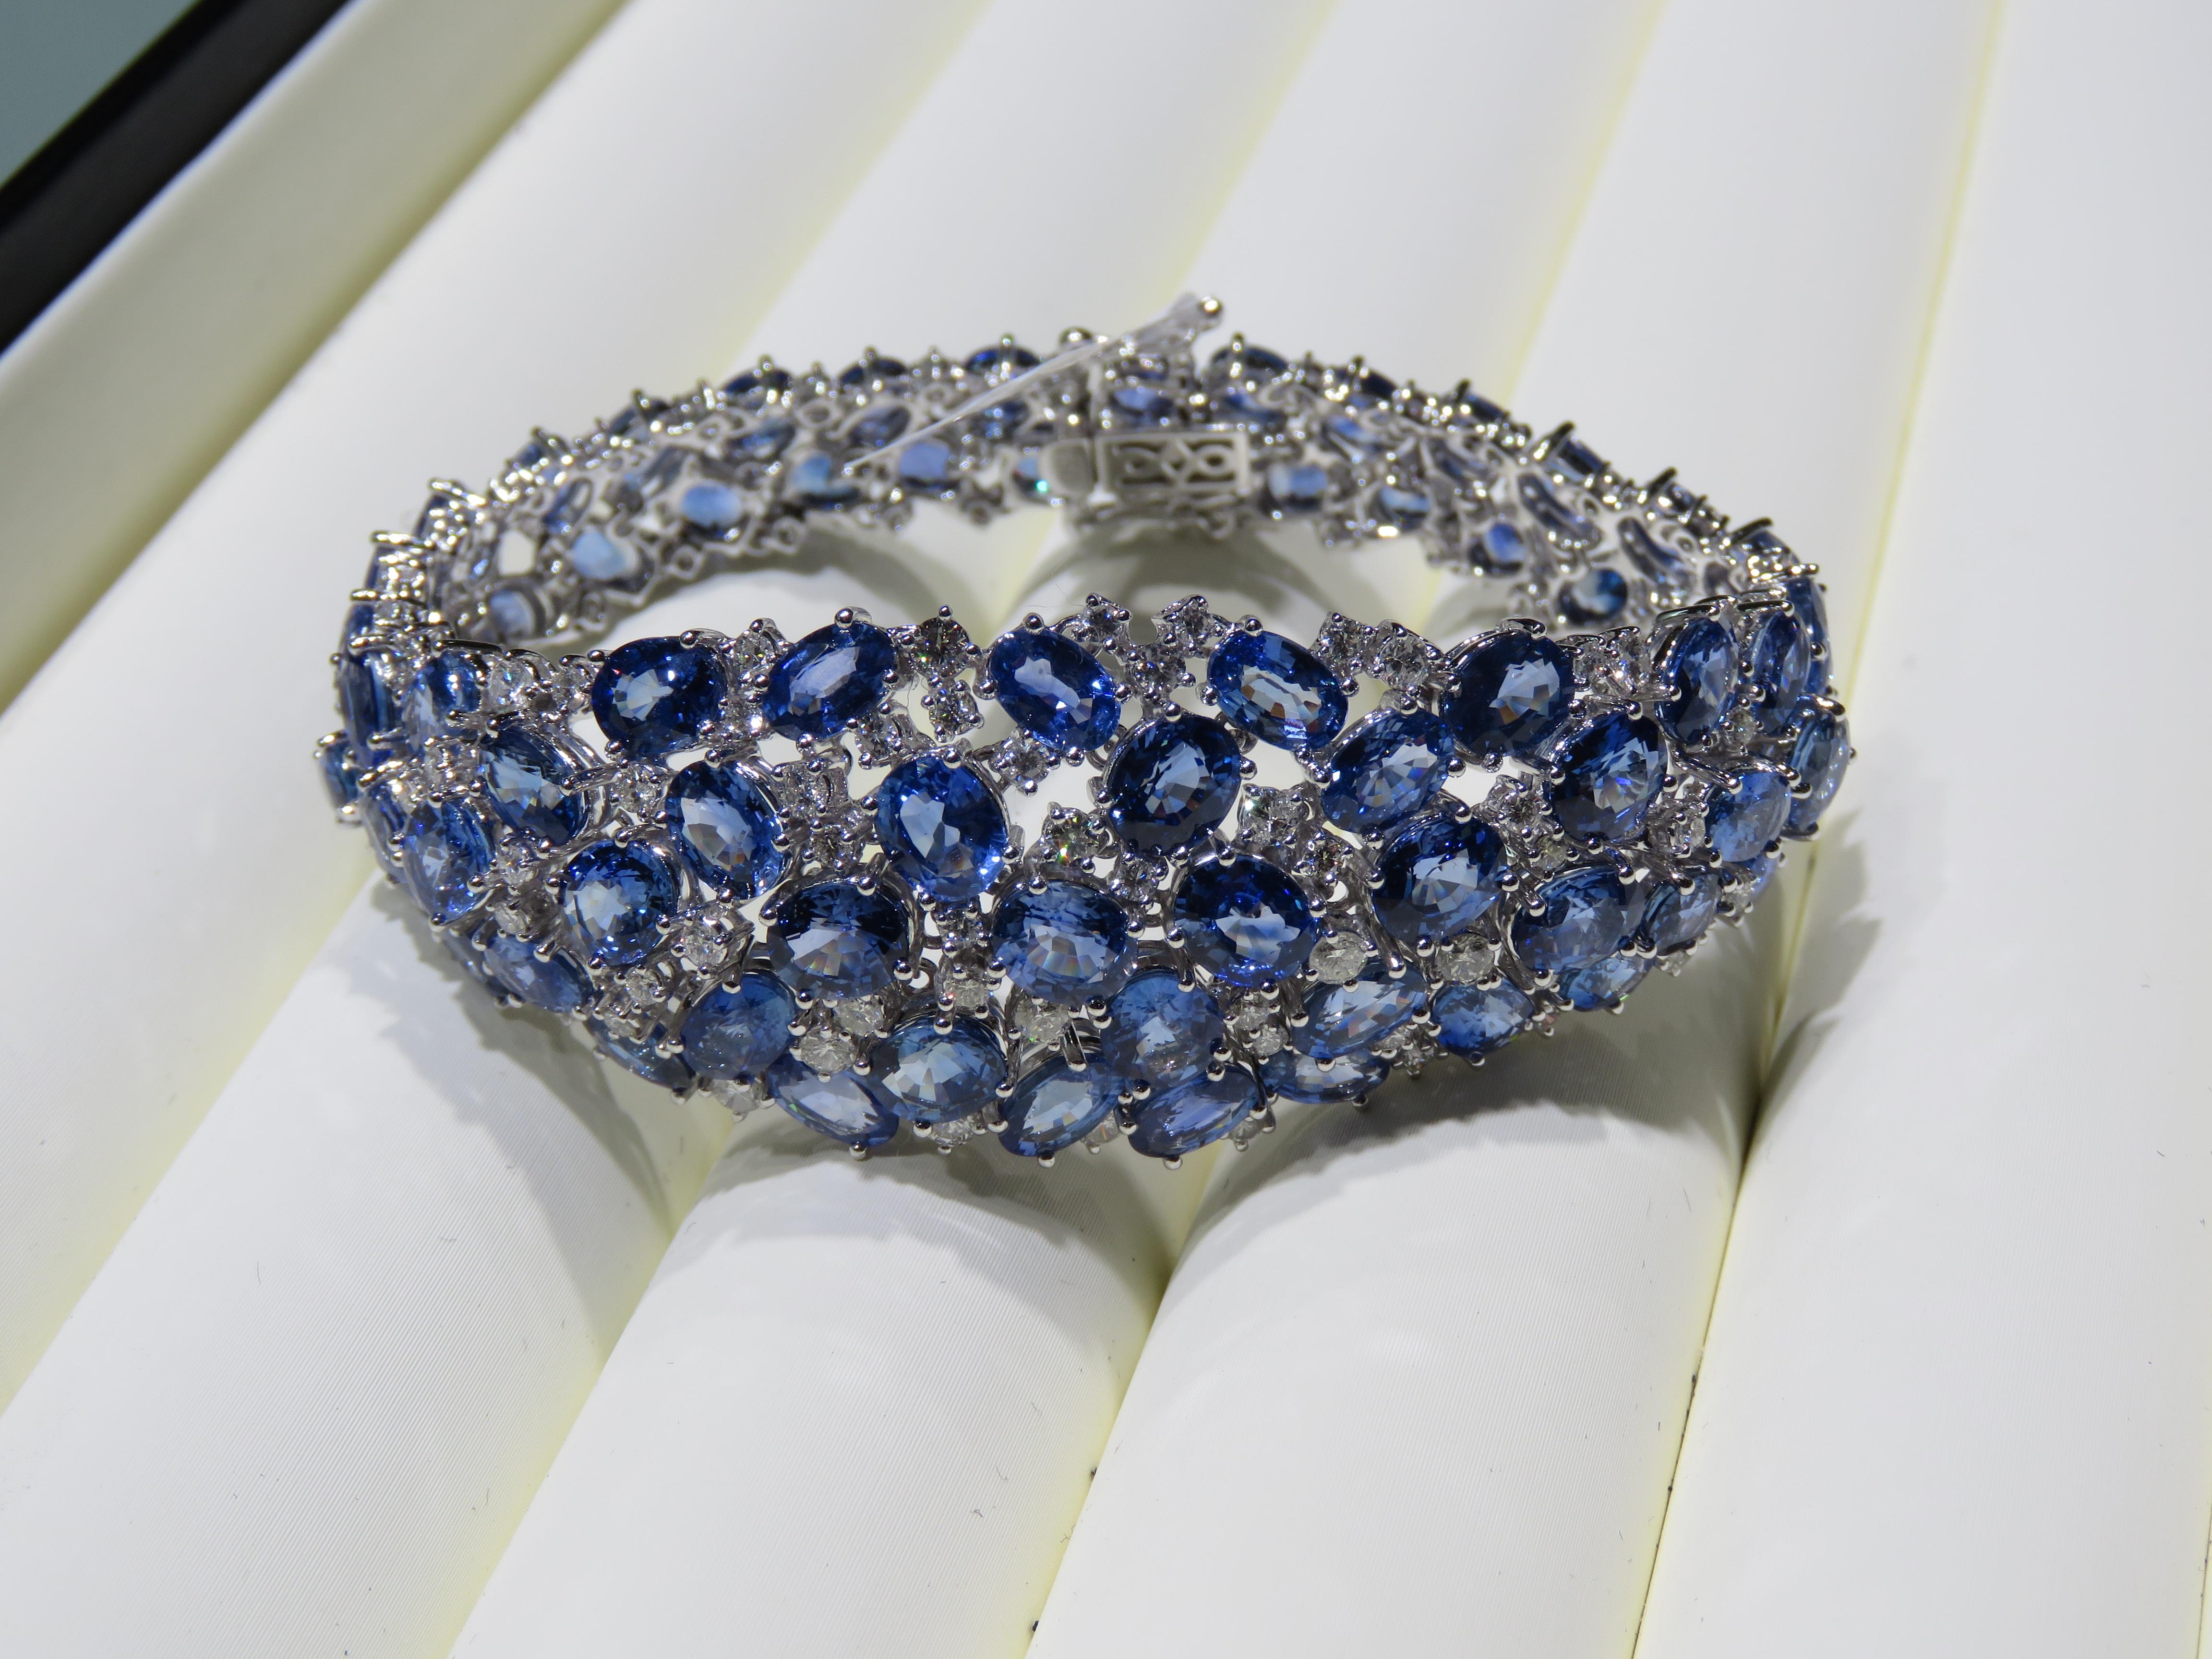 A Rare 18KT White Gold Ceylon Sapphire Diamond Bracelet. Bracelet is comprised of Finely Set Glittering Gorgeous Ceylon Sapphires and adorned with Sparkling Round Diamonds!! T.C.W. approx 50CTS!!! This Gorgeous Bracelet is a Sample Piece from a